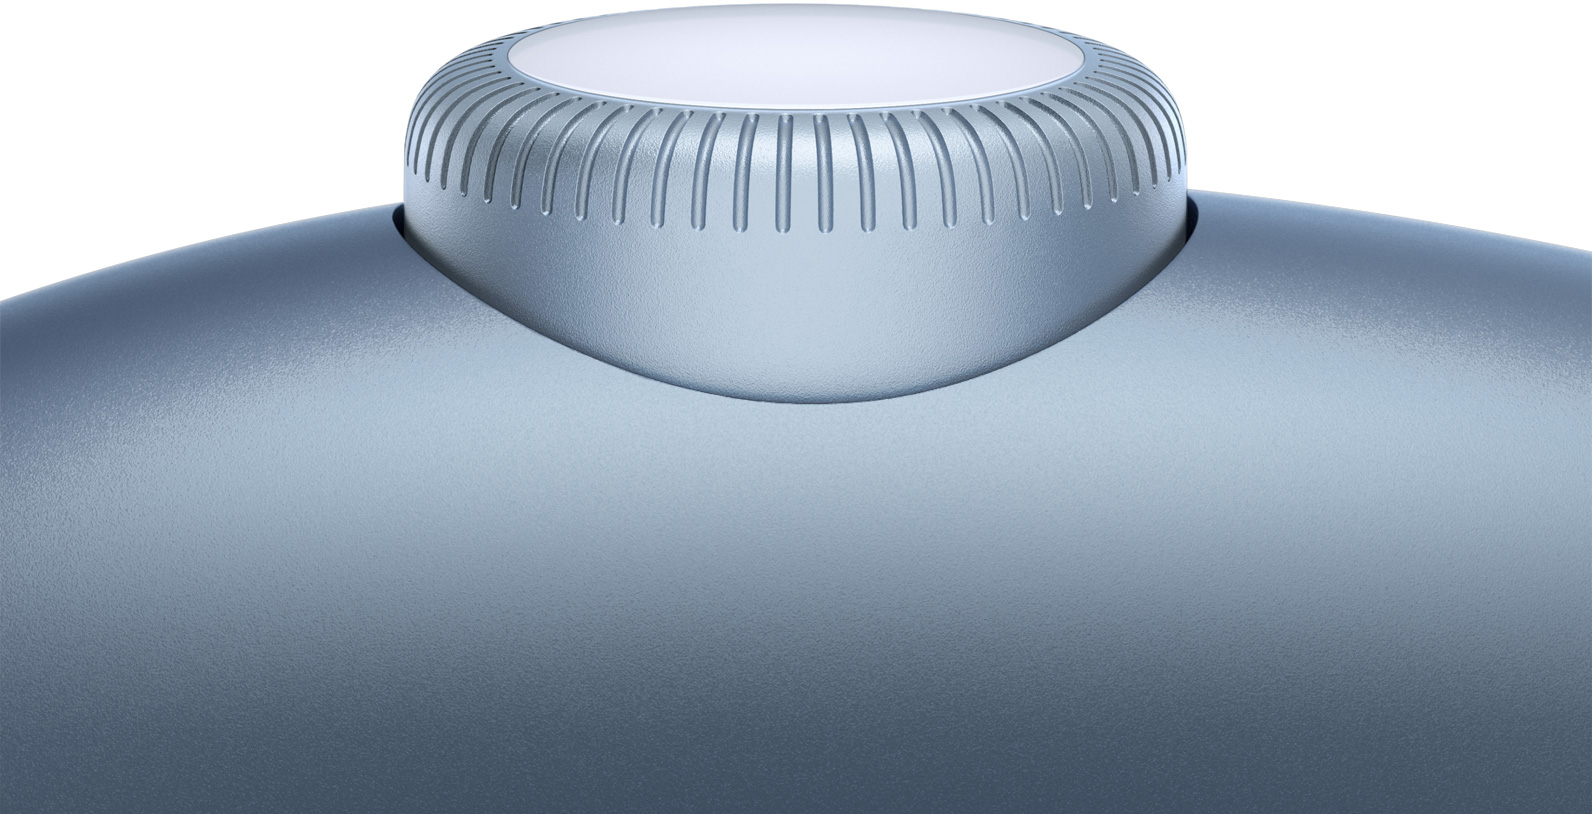 Animation, close-up of digital crown rotating on ear cup, AirPods Max in Sky Blue.